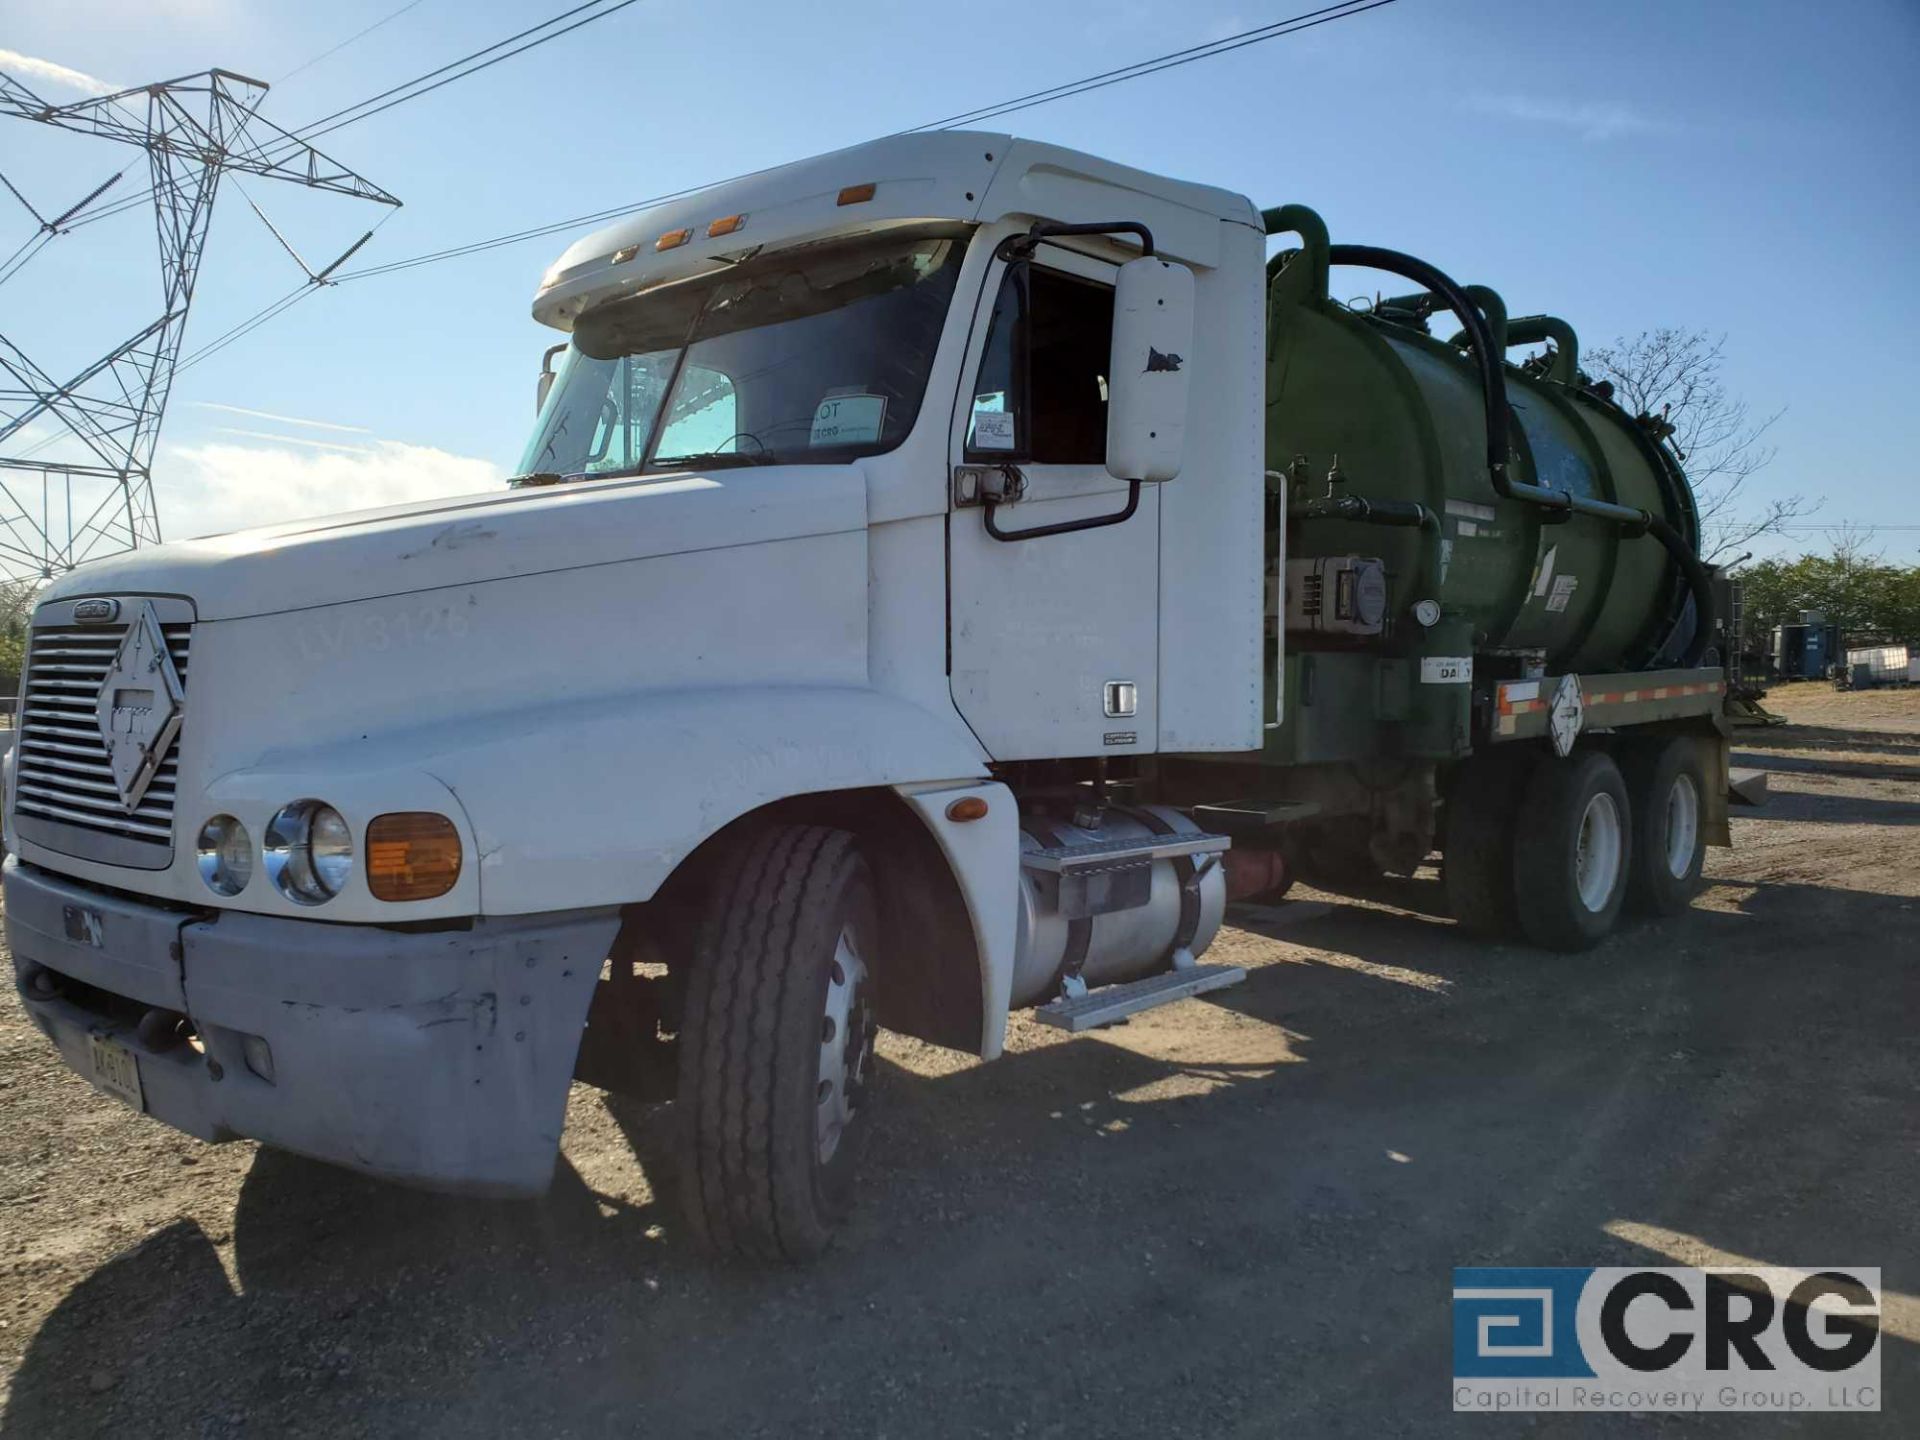 2001 Freightliner Century Liquid Vac Truck, 60,000 GVWR, 30,023 hours, with 3,200 gal. capacity